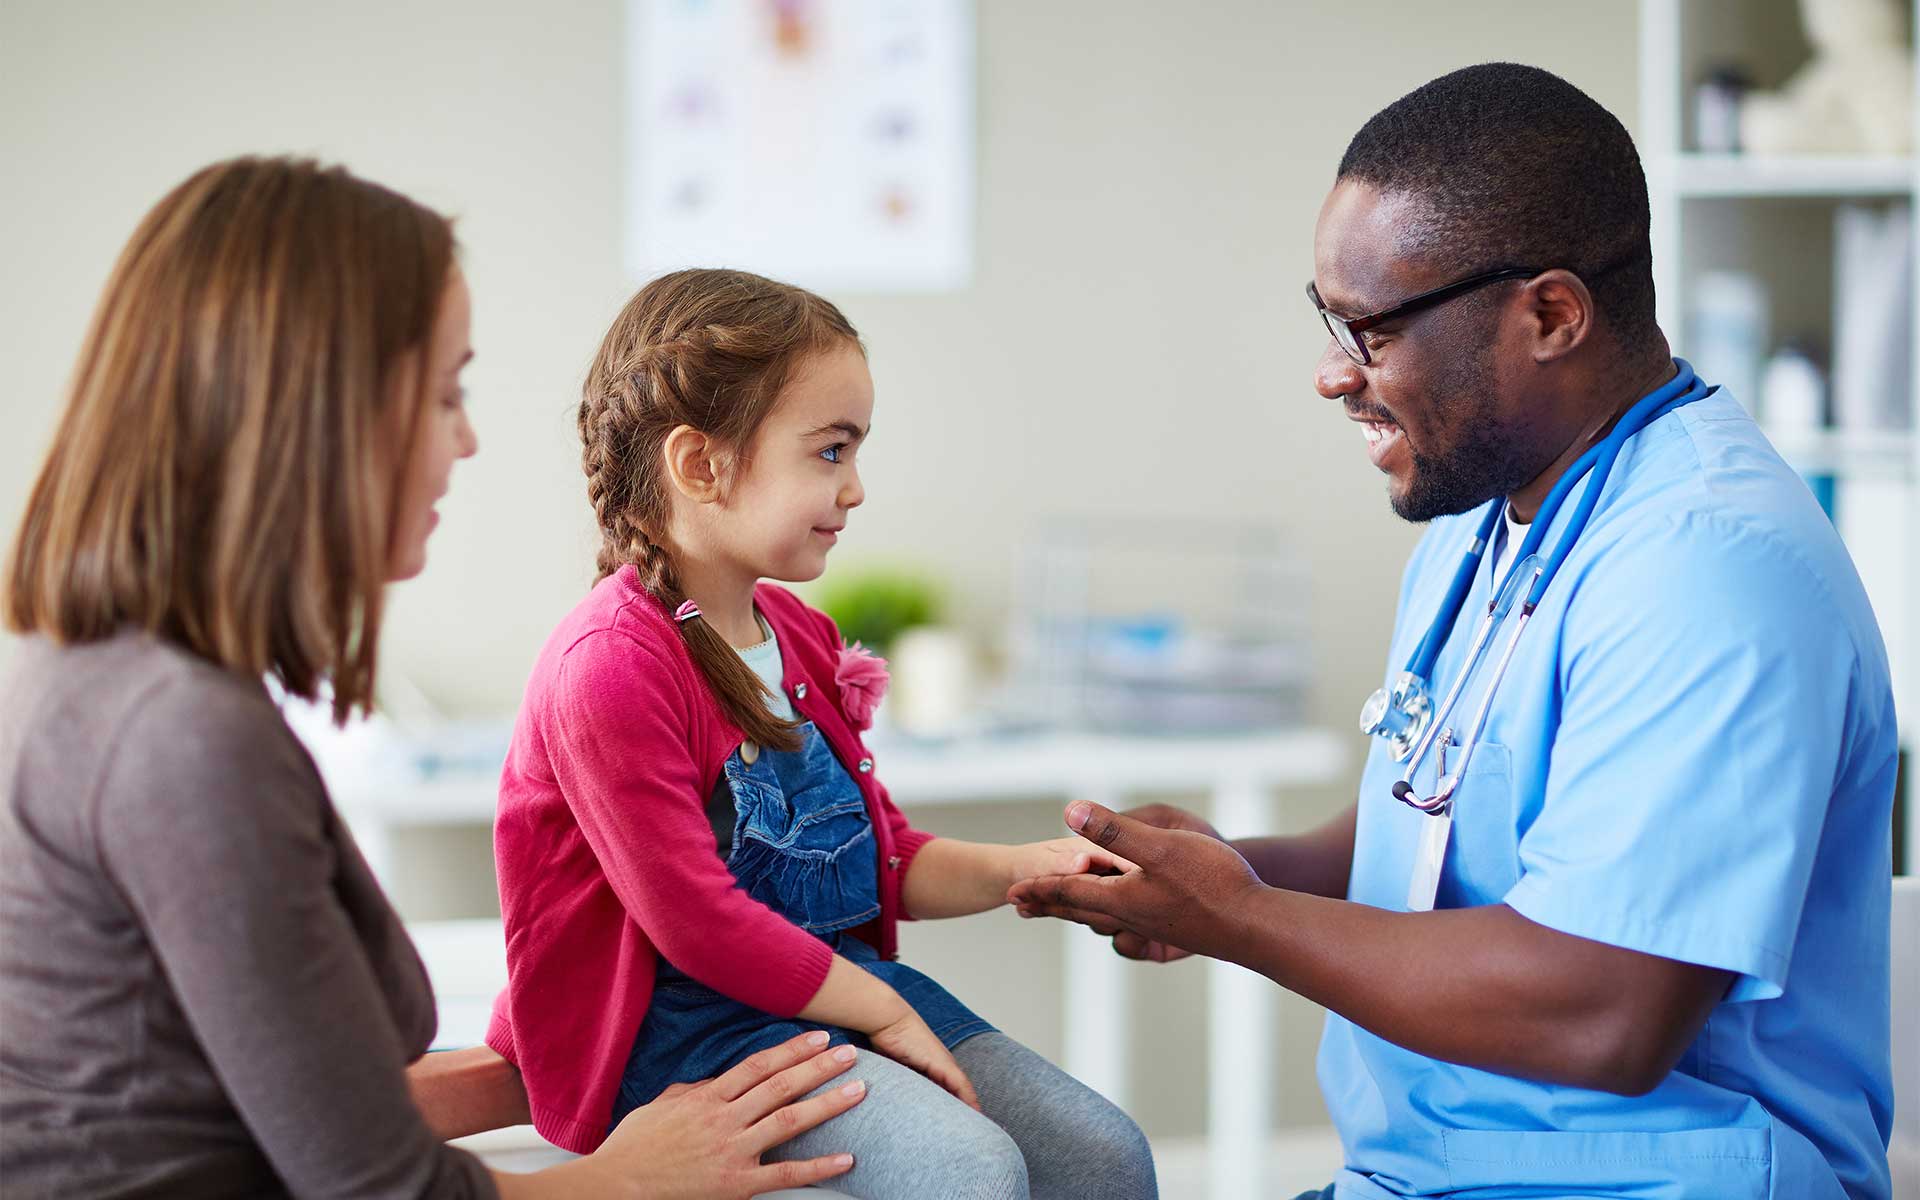 Top 3 Diagnoses for Kids With Special Care Needs